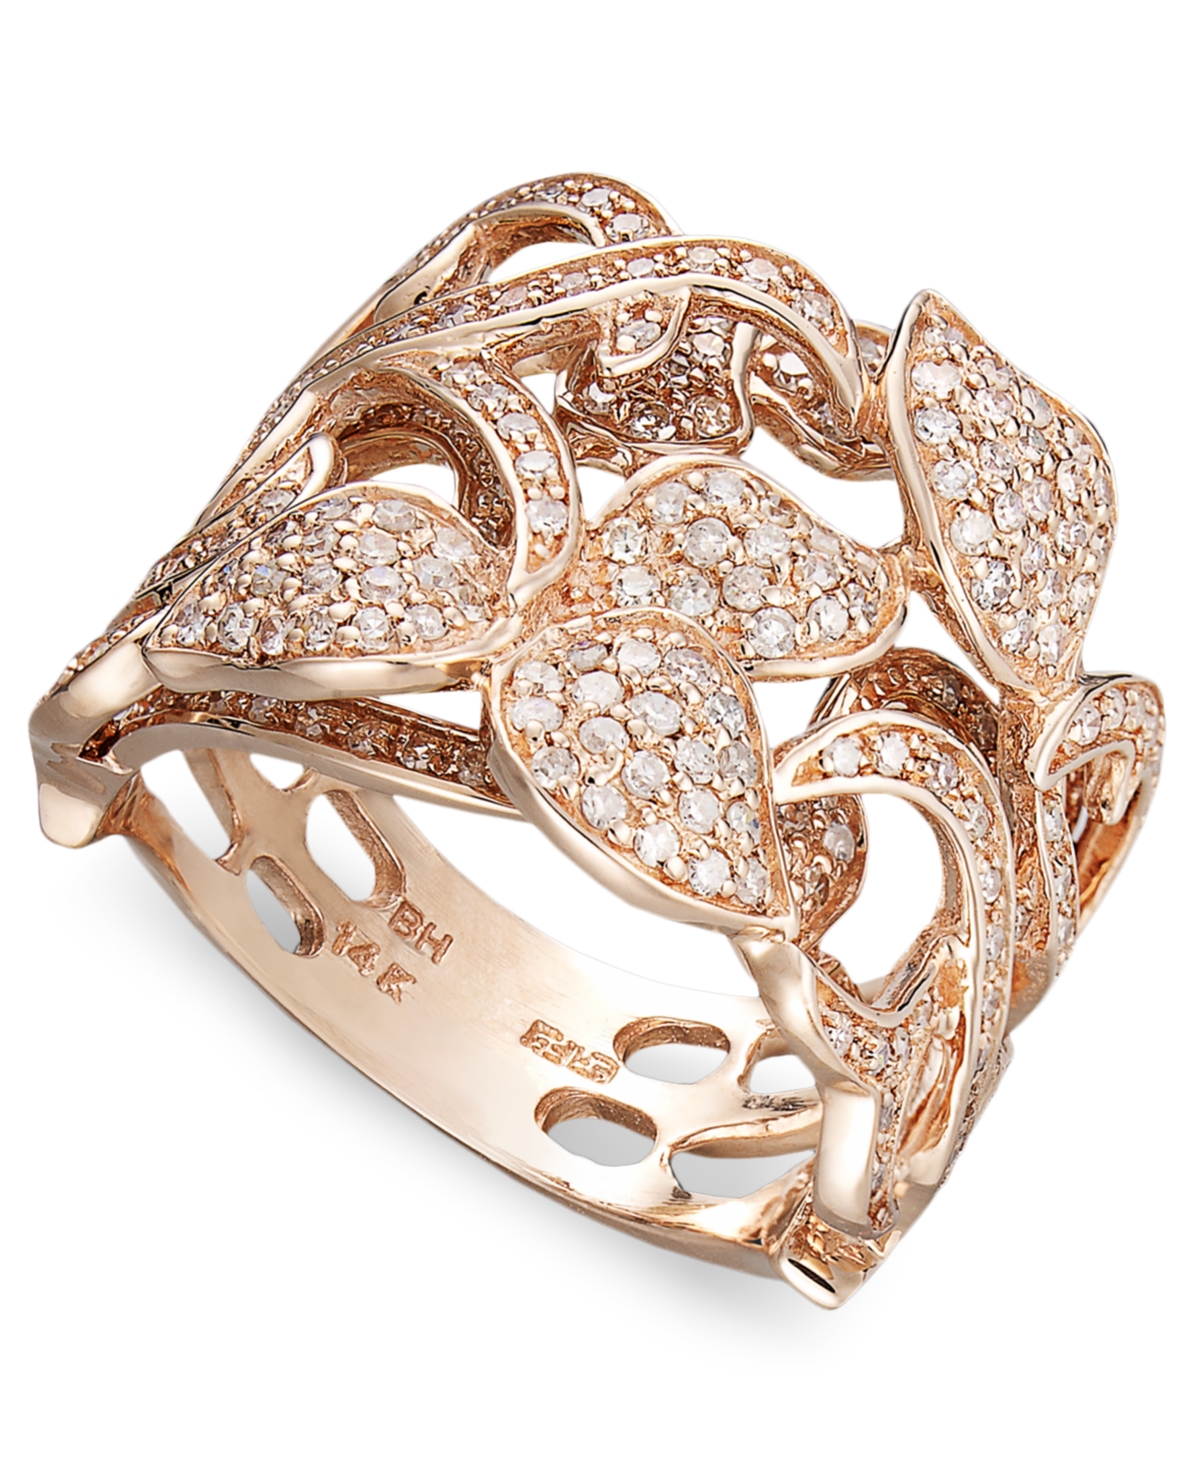 Pave Rose by Effy Diamond Diamond Leaf and Flower Ring (9/10 ct. t.w.) in 14k Rose Gold - Rose Gold